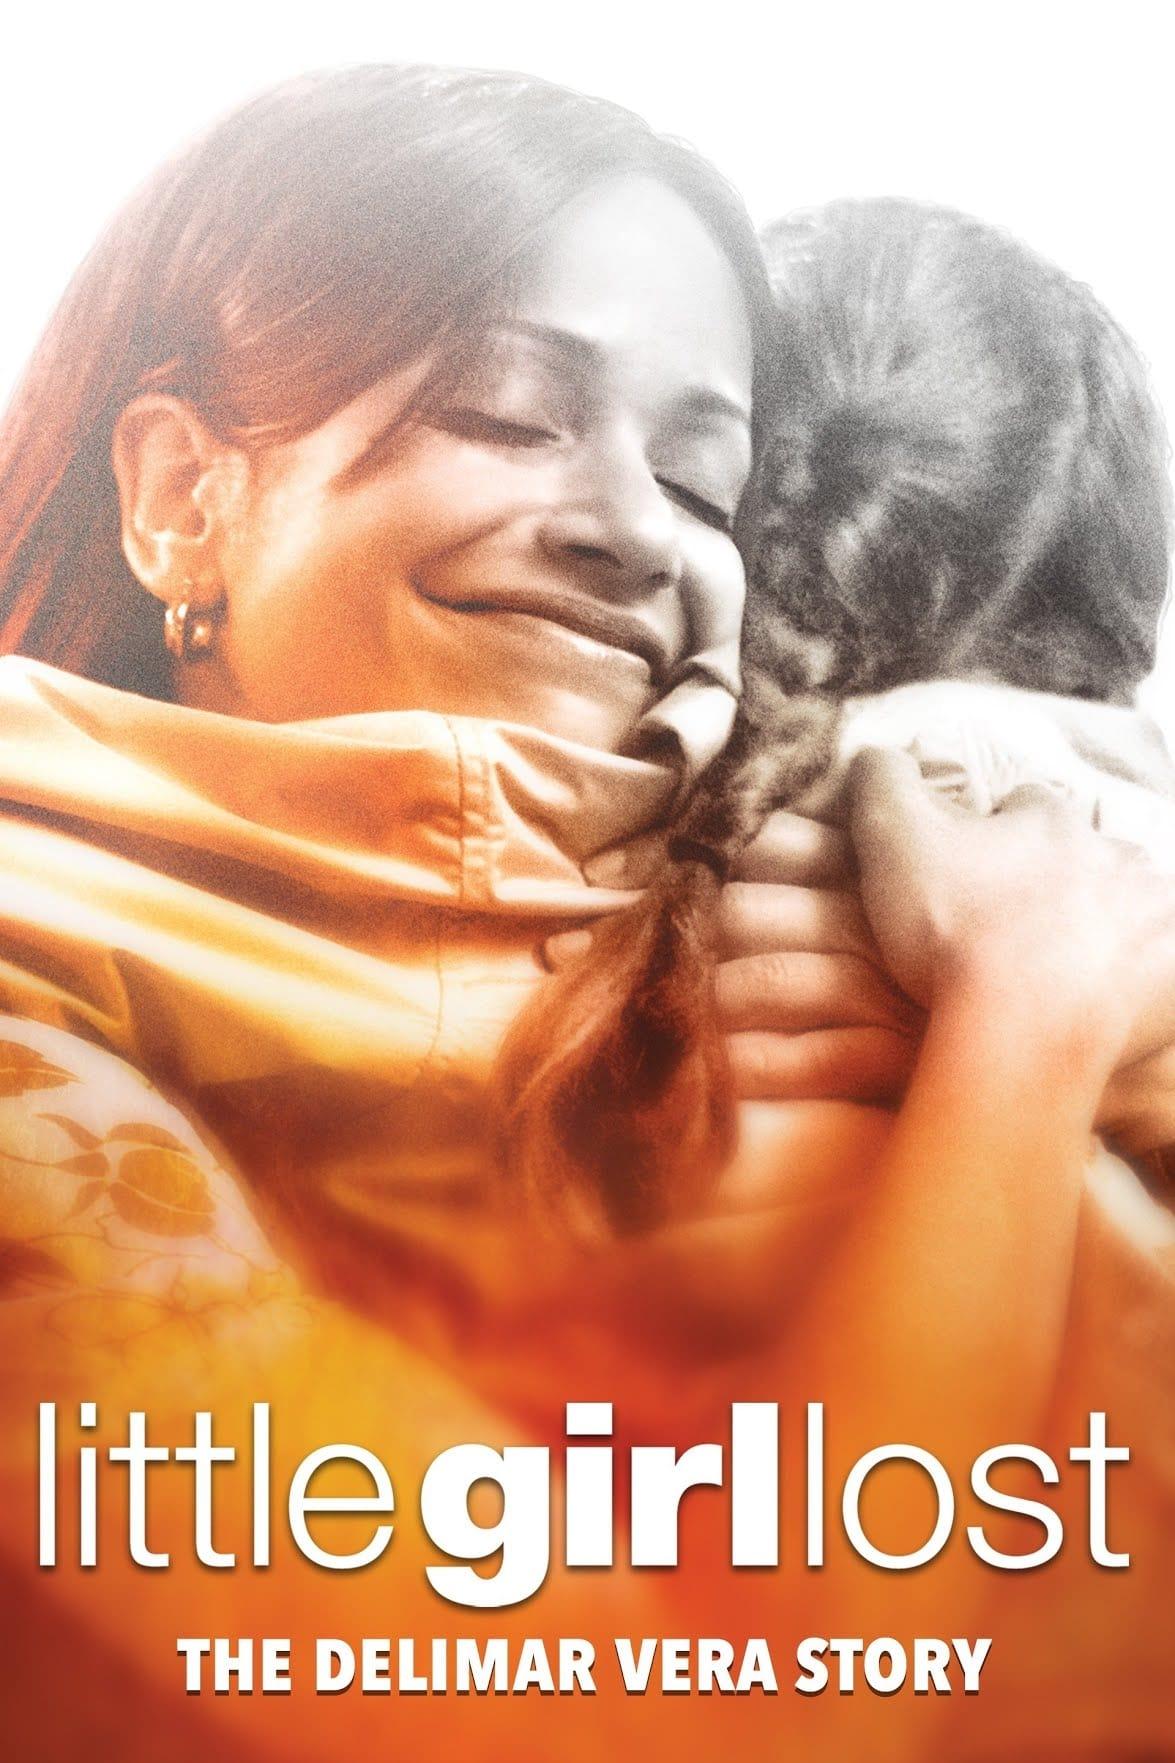 Little Girl Lost: The Delimar Vera Story poster